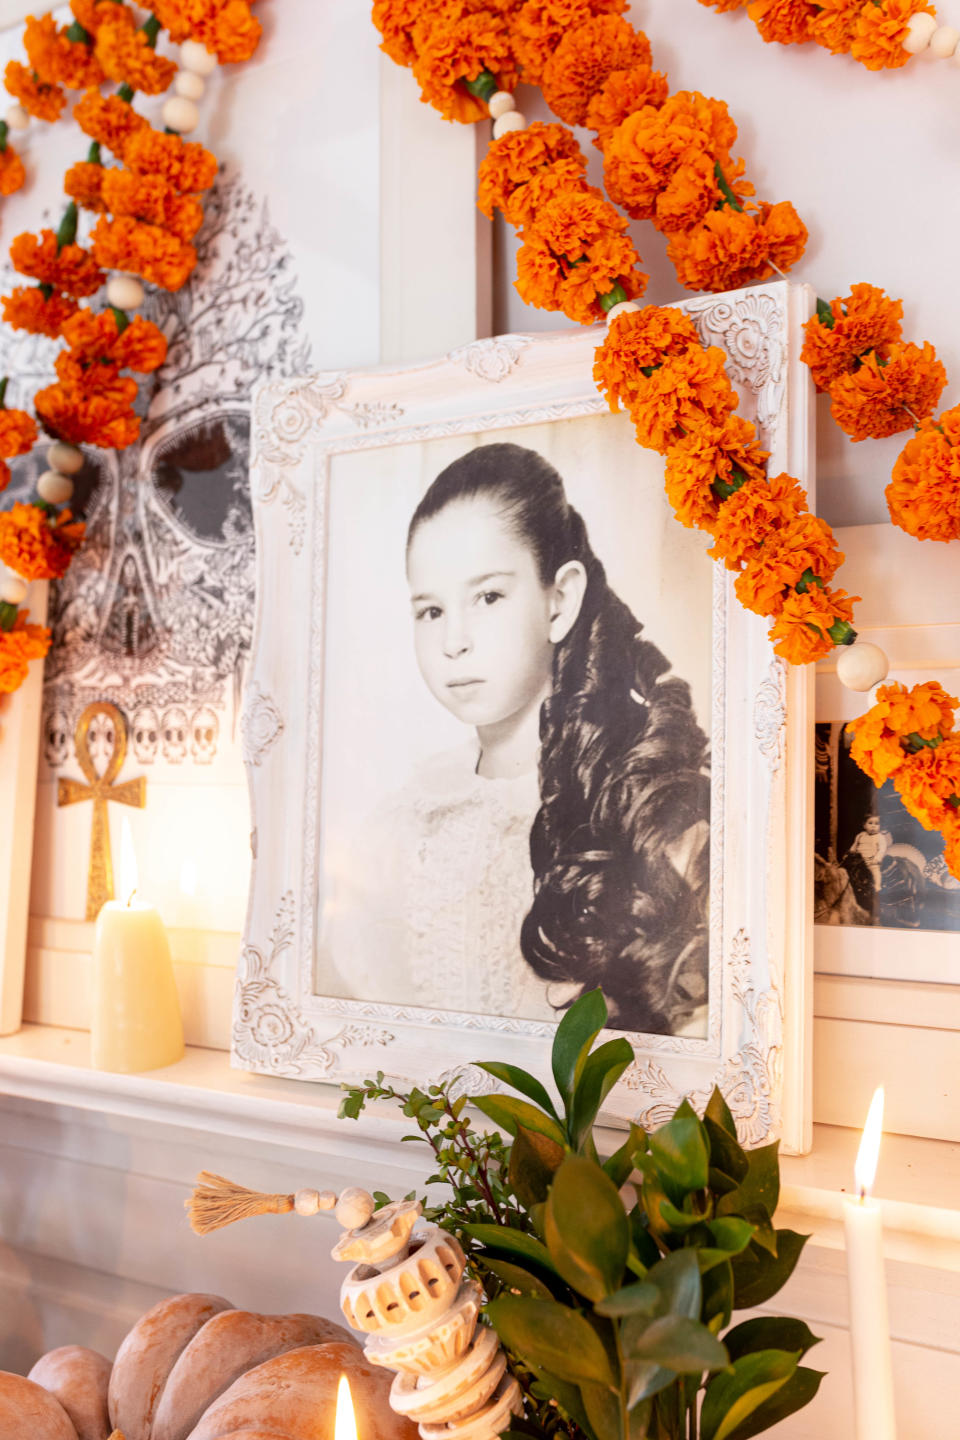 The ofrenda features a photo of Valladolid's mother, who passed away in 2008, as a young girl. (Photo: Cecilia Martin Del Campo)